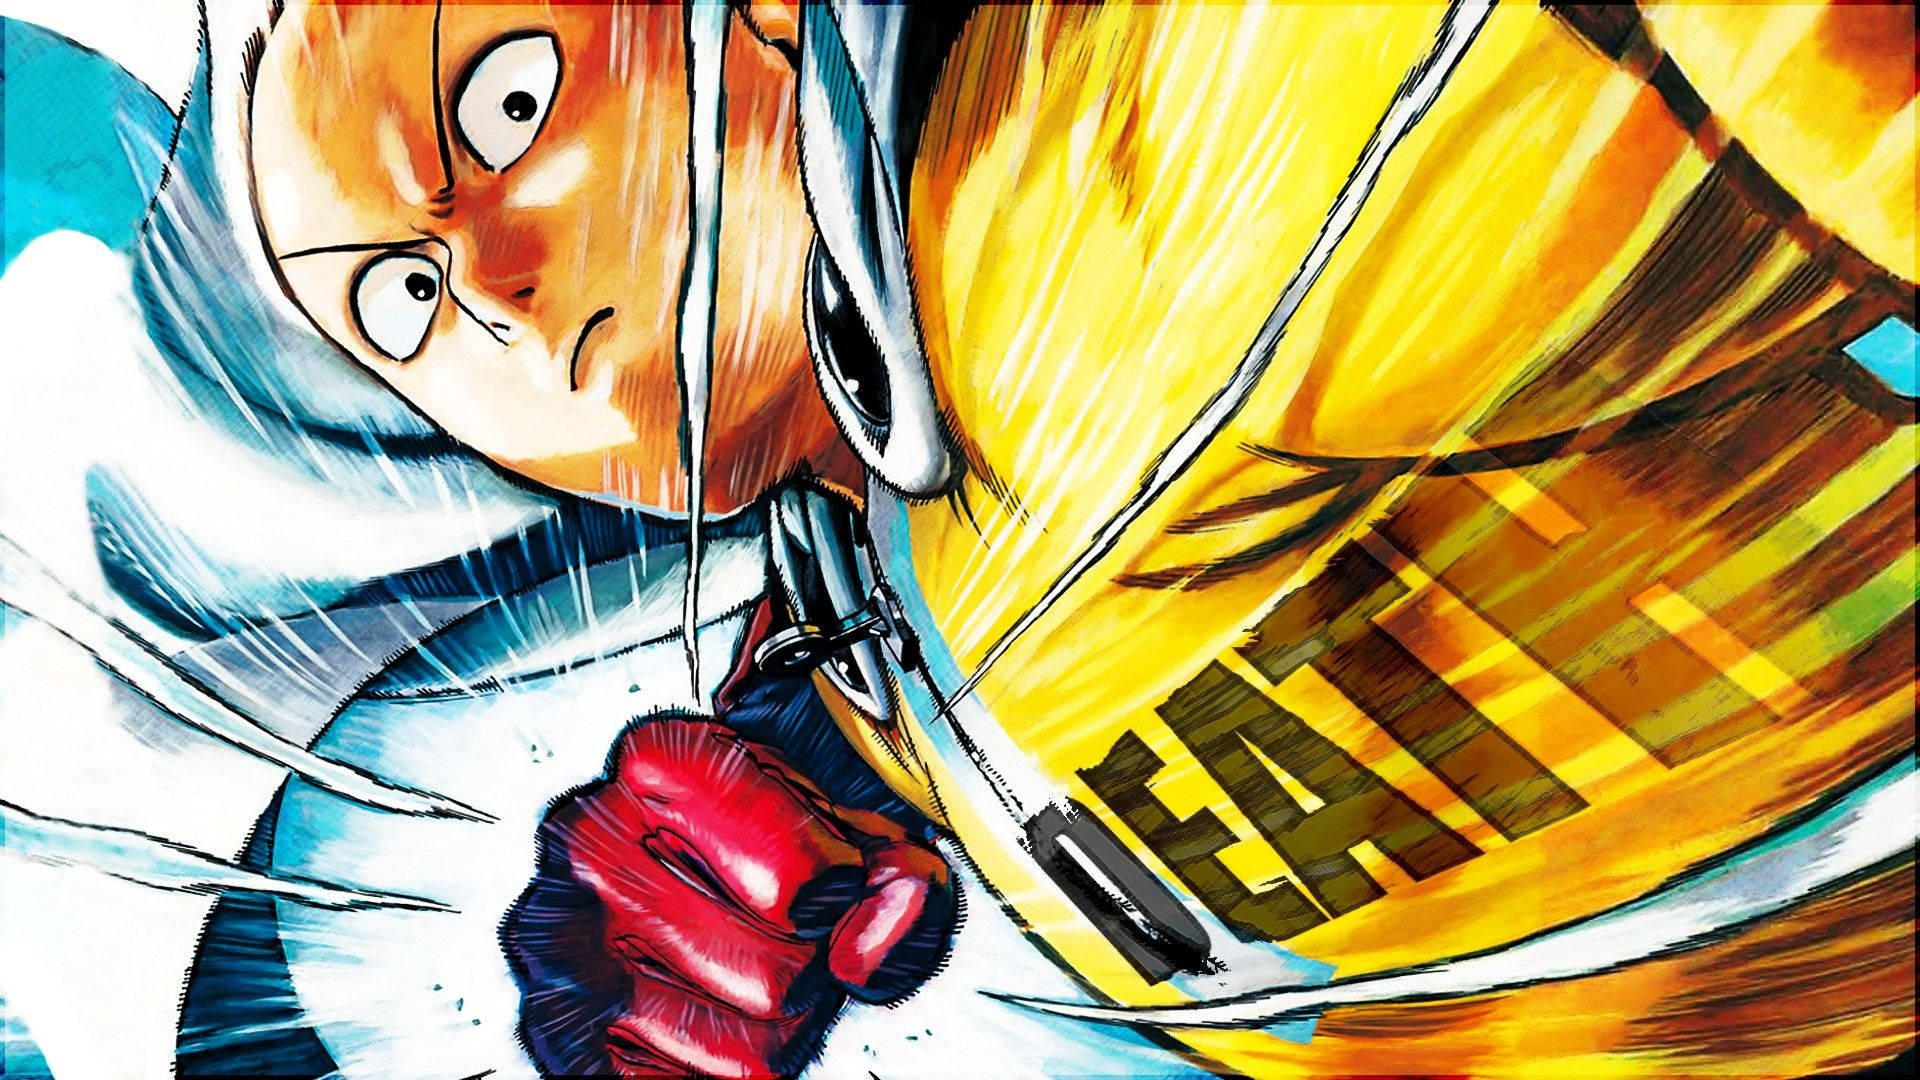 “The Power of One Punch Man